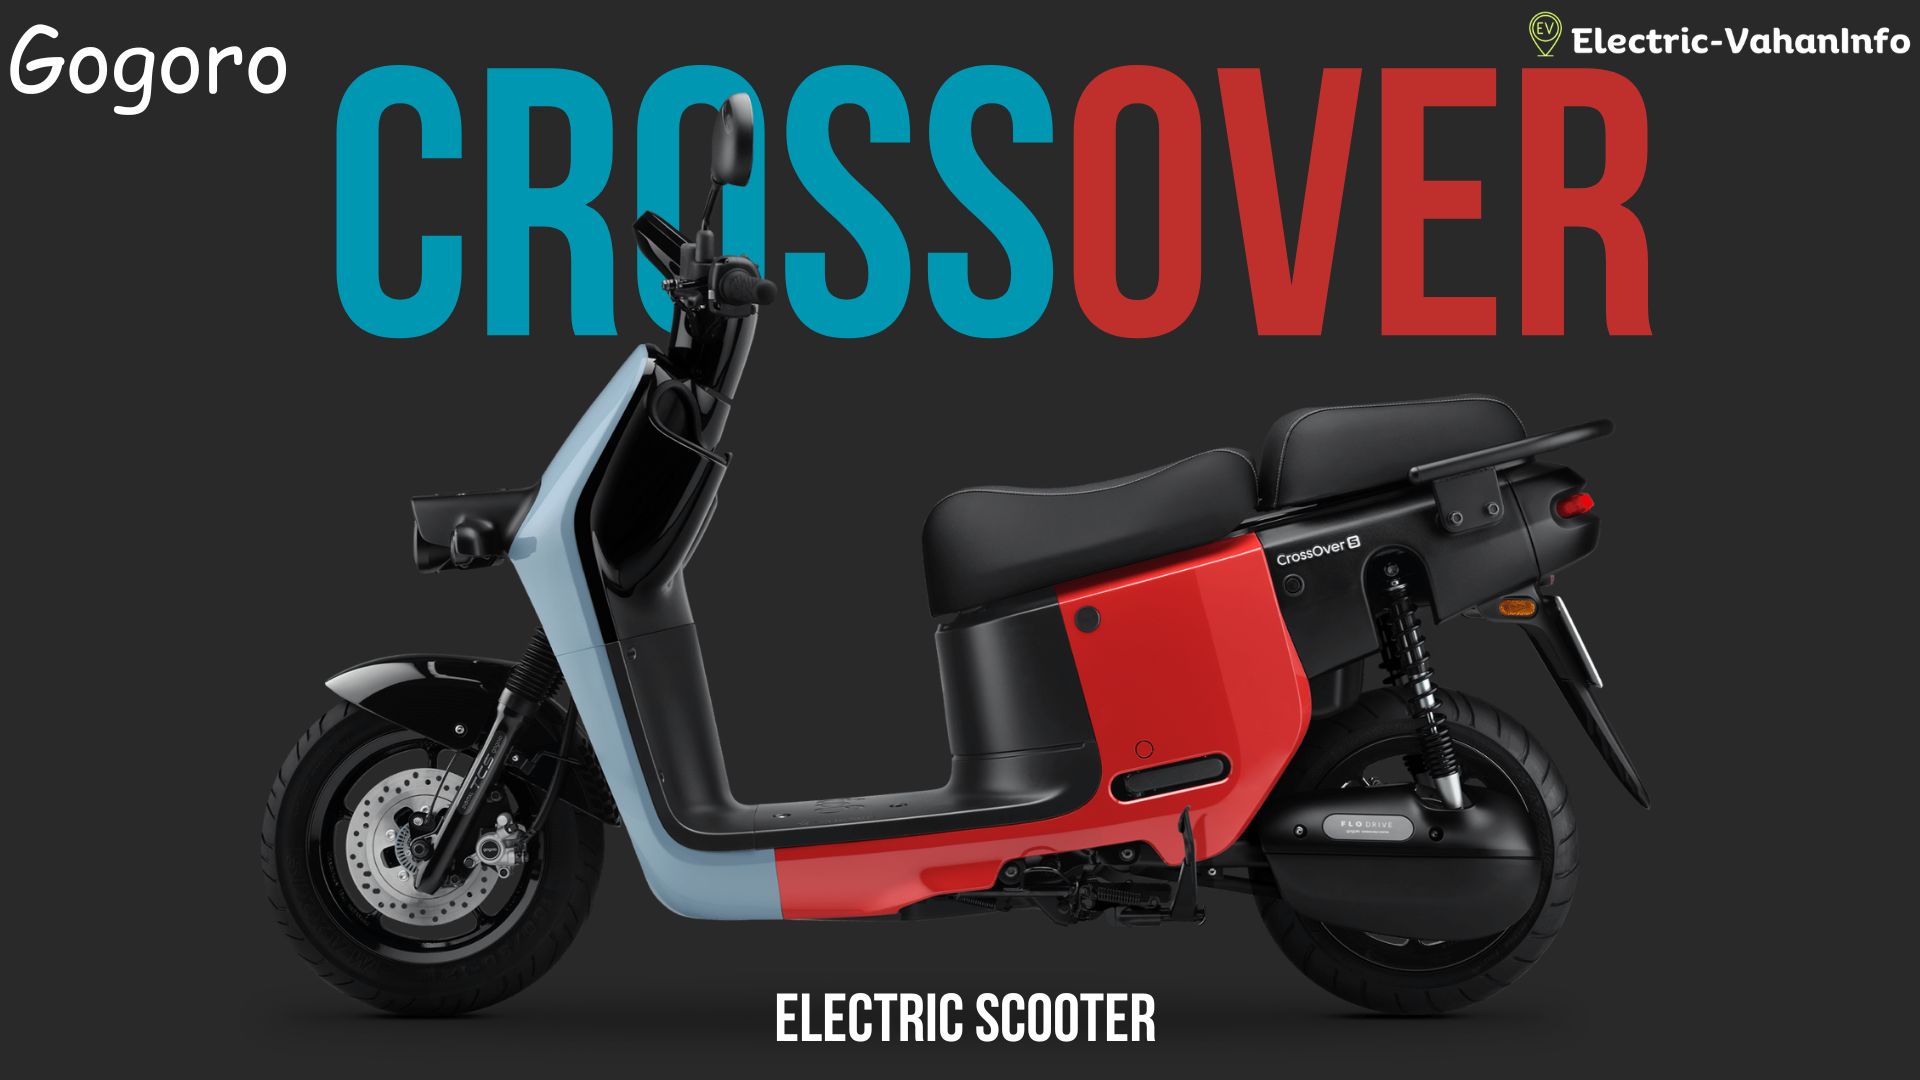 https://electric-vahaninfo.com/gogoro-crossover-electric-scooter-to-launch-in-india-on-december-12-everything-you-need-t-o-know/